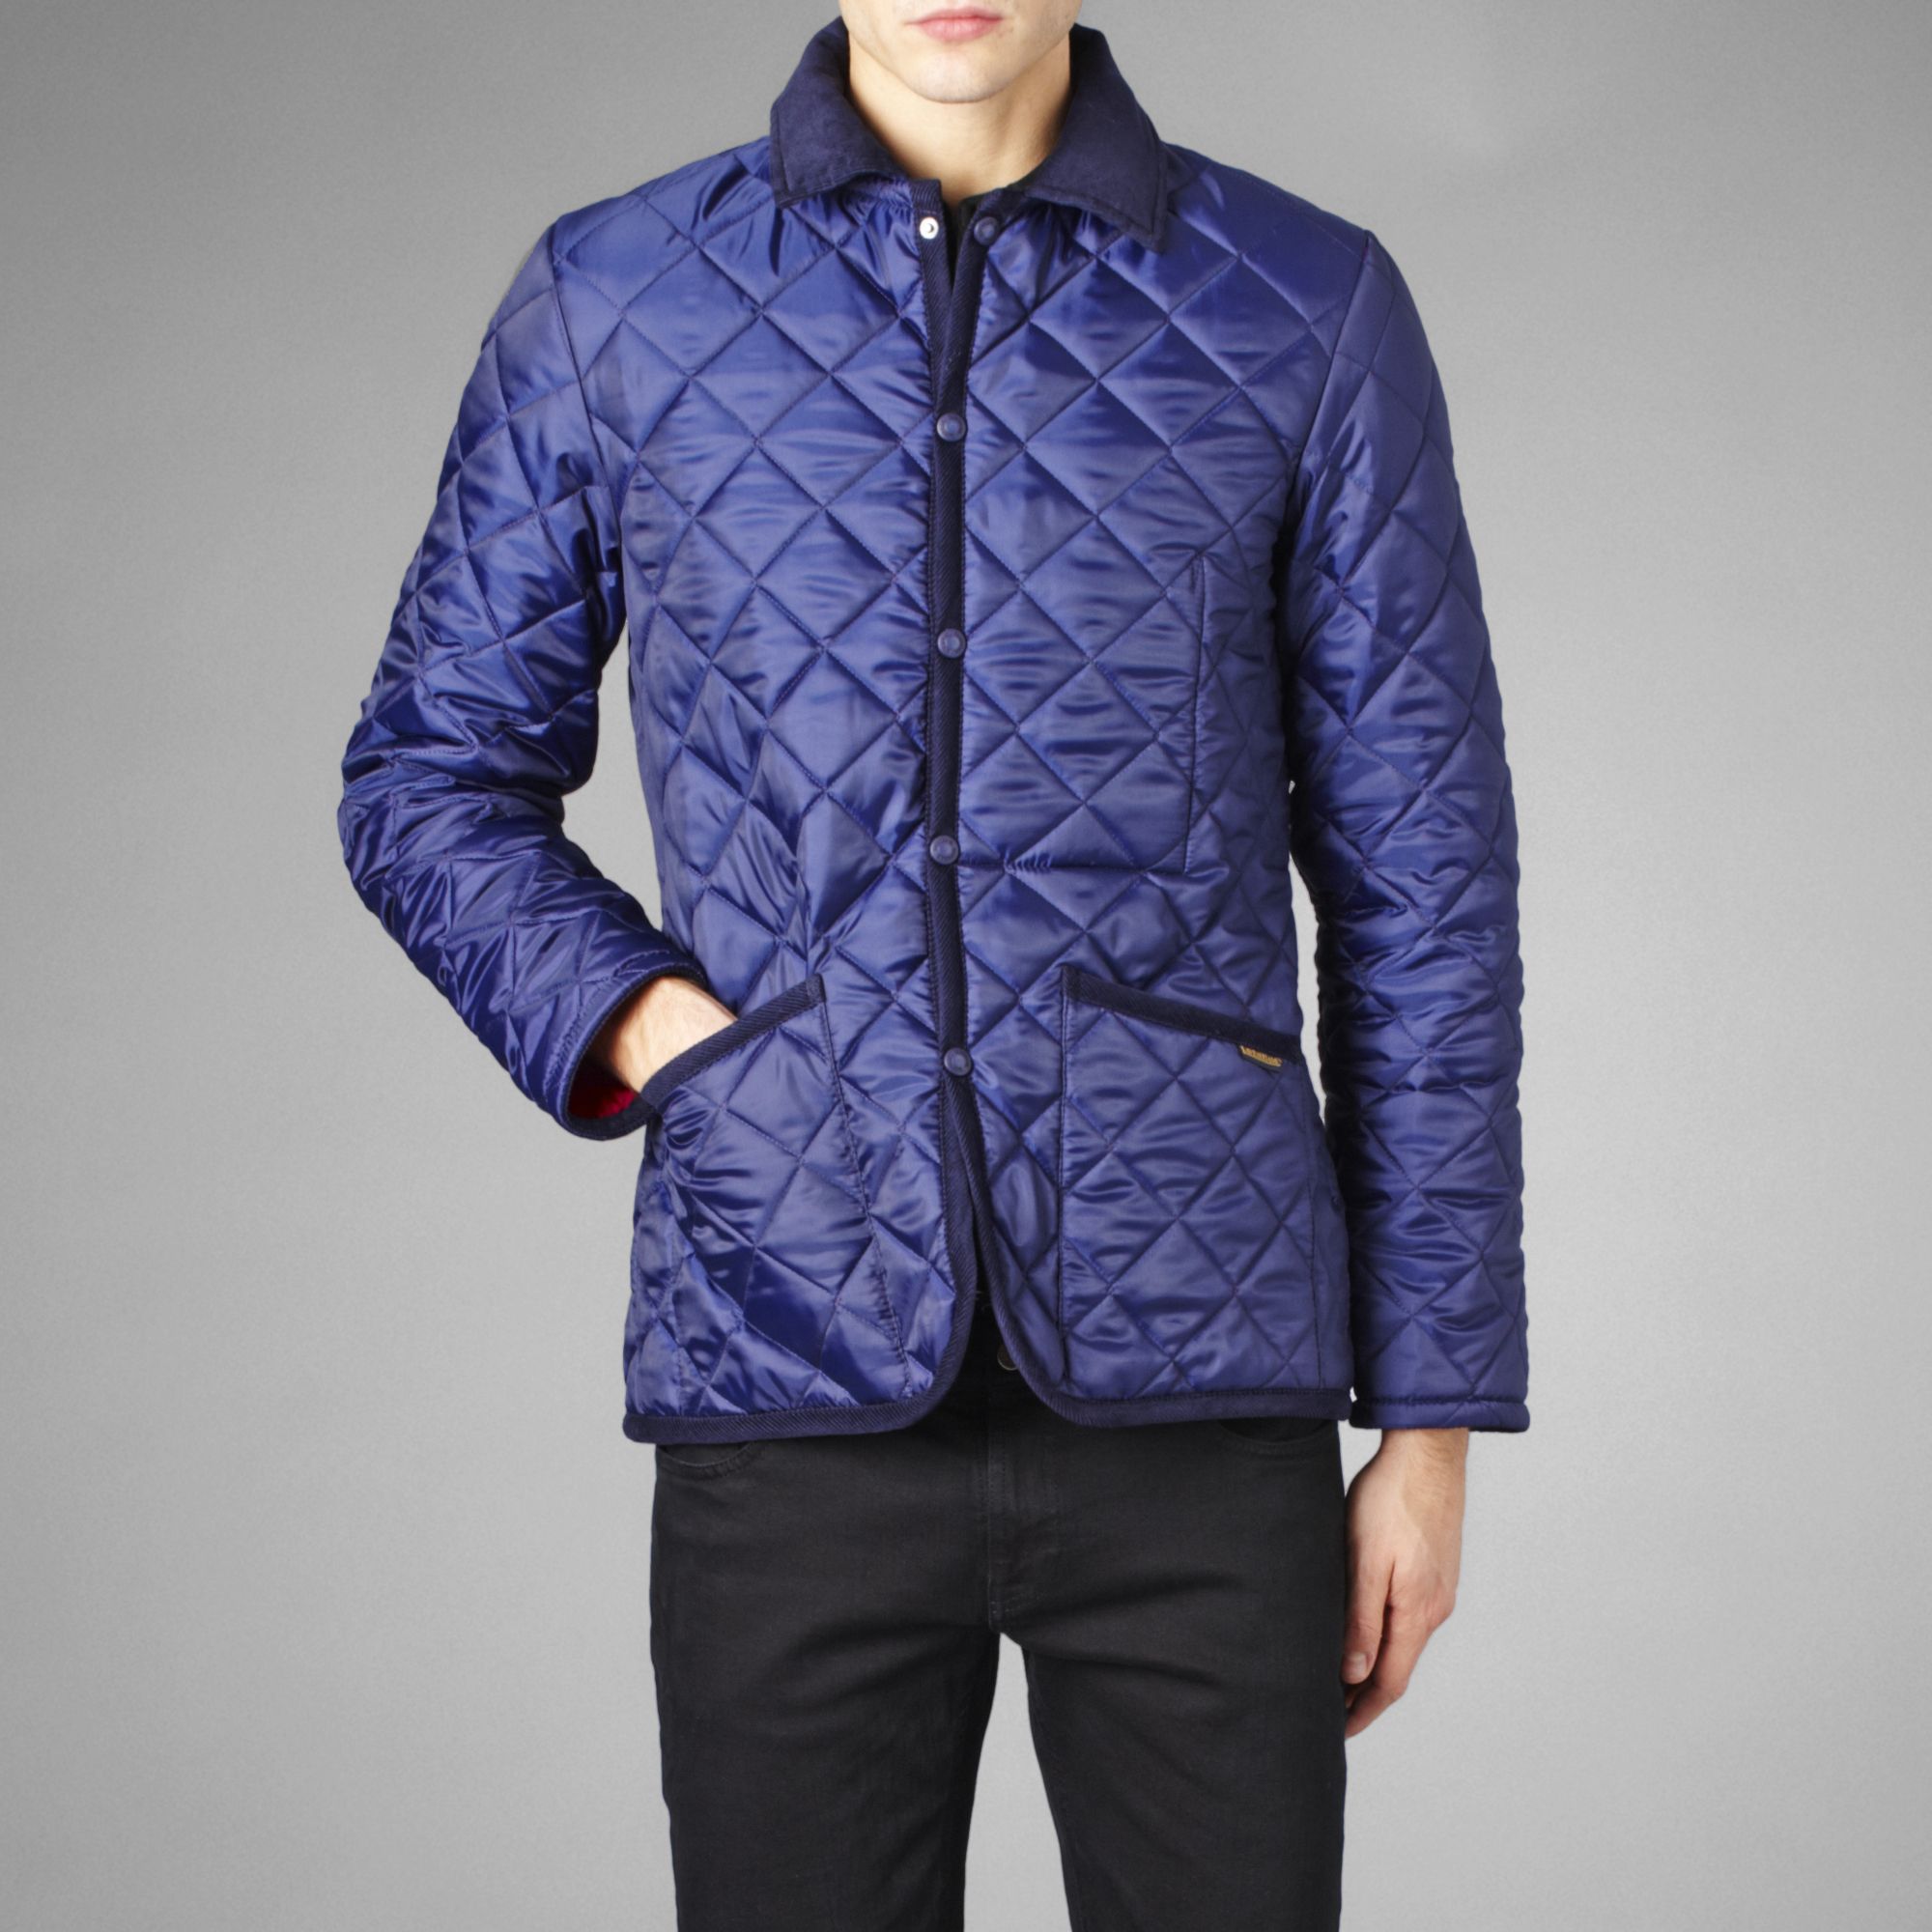 Lavenham Raydon Quilted Cord Trim Jacket in Navy (Blue) for Men - Lyst